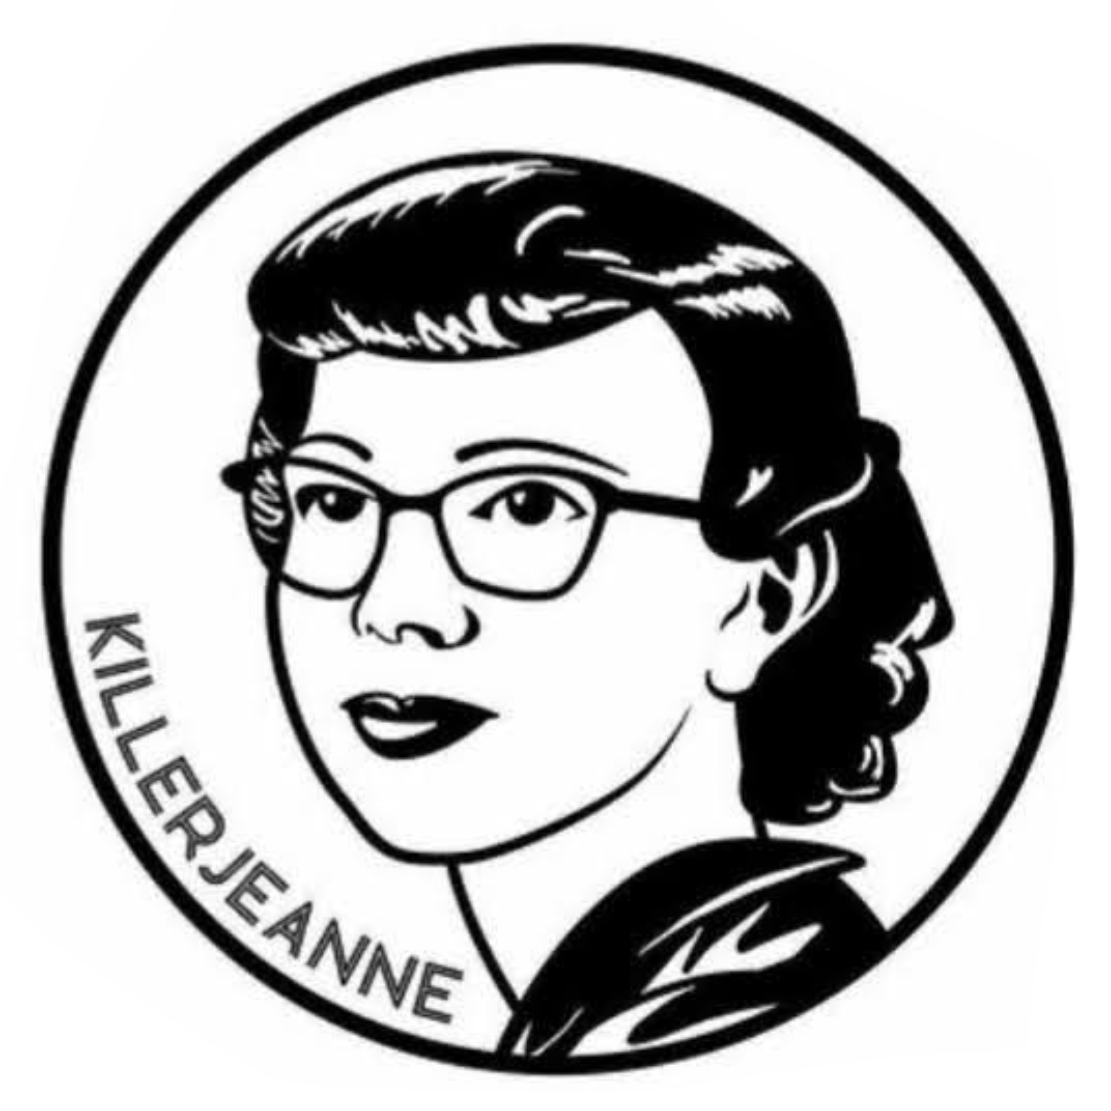 KillerJeanne logo - black circle with vintage black and white drawing of woman in glasses